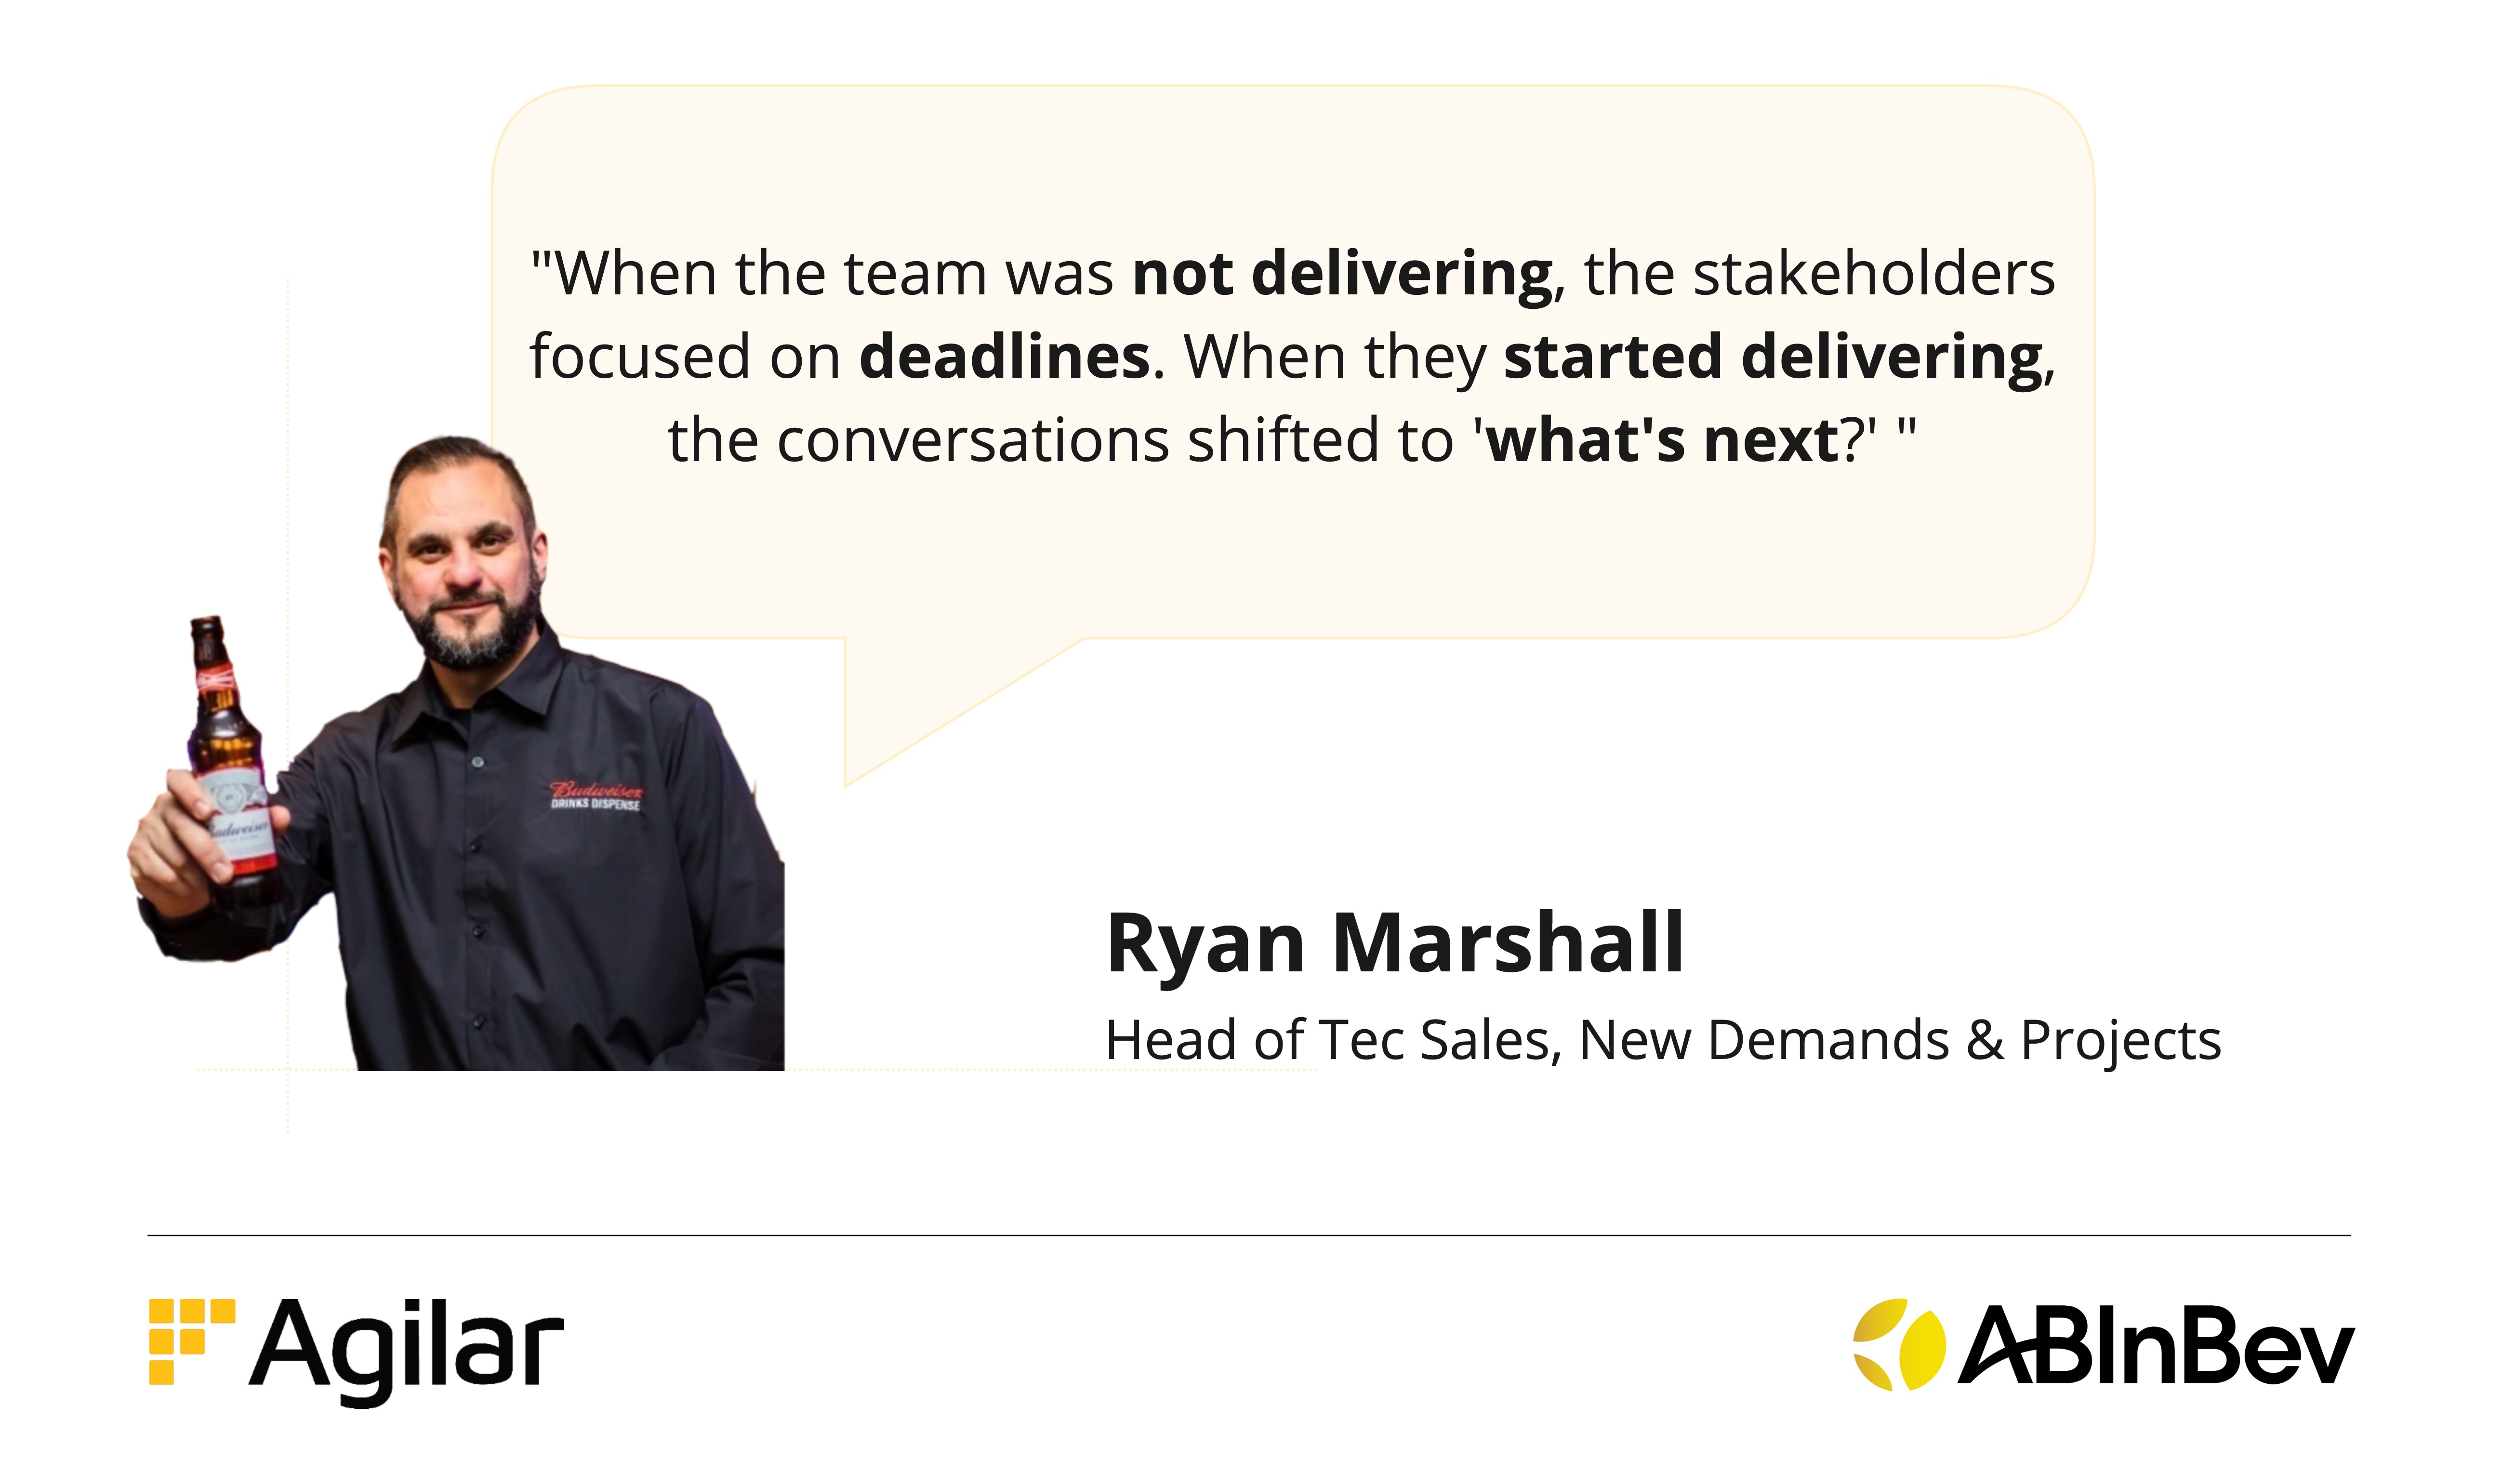 Quote from Ryan Marshall: "When the team was NOT delivering, the stakeholders focused on deadlines. When they started delivering, the conversations shifted to 'what's next?'"